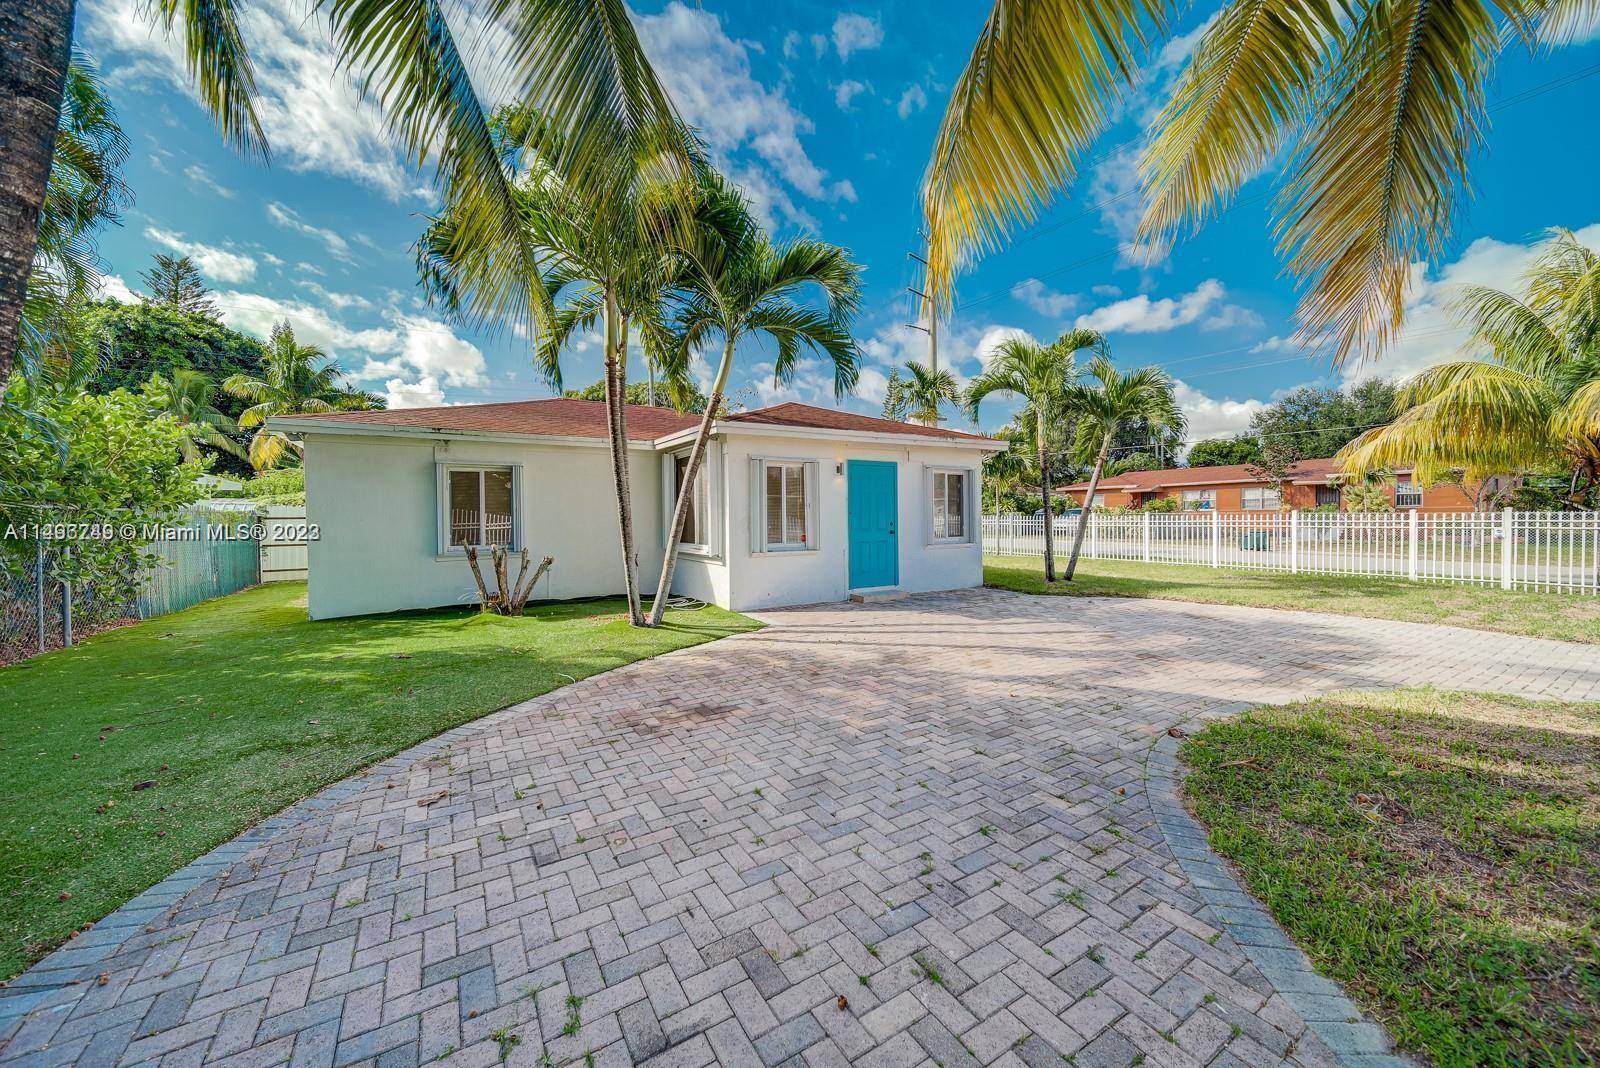 Photo of 442 NW 100th St in Miami, FL